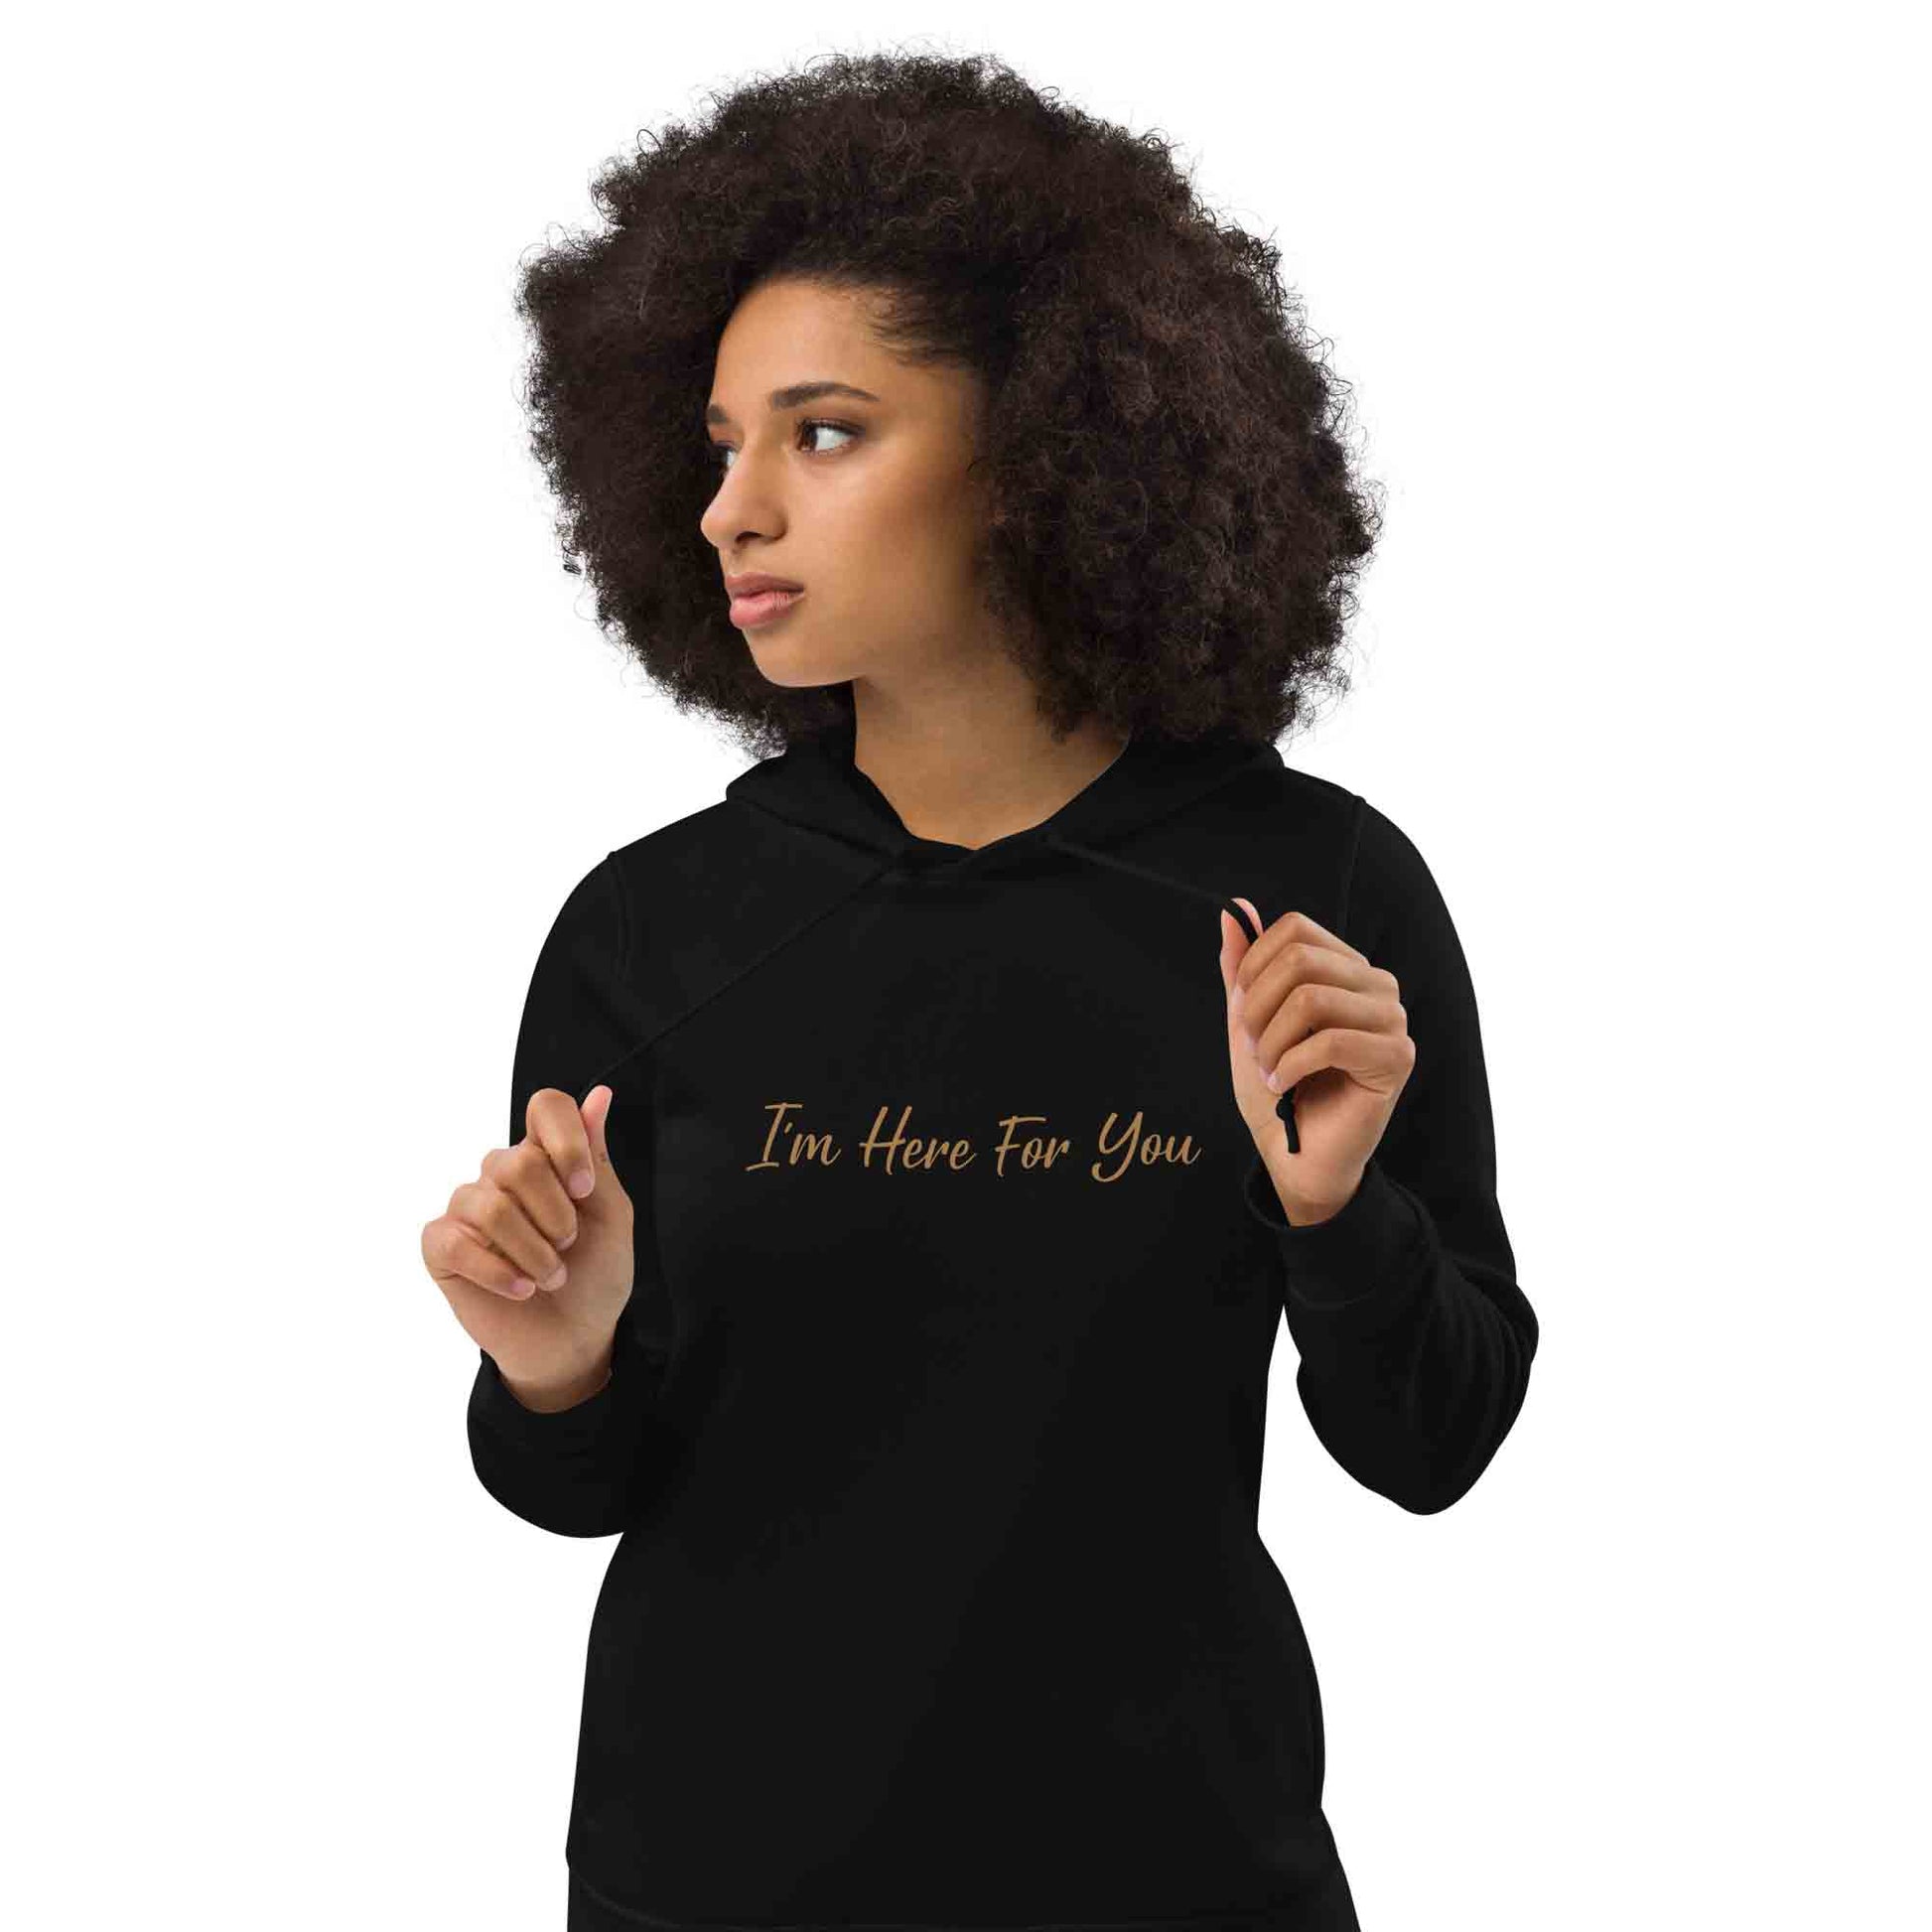 Women black organic cotton hoodie with inspirational quote, "I'm Here For You."